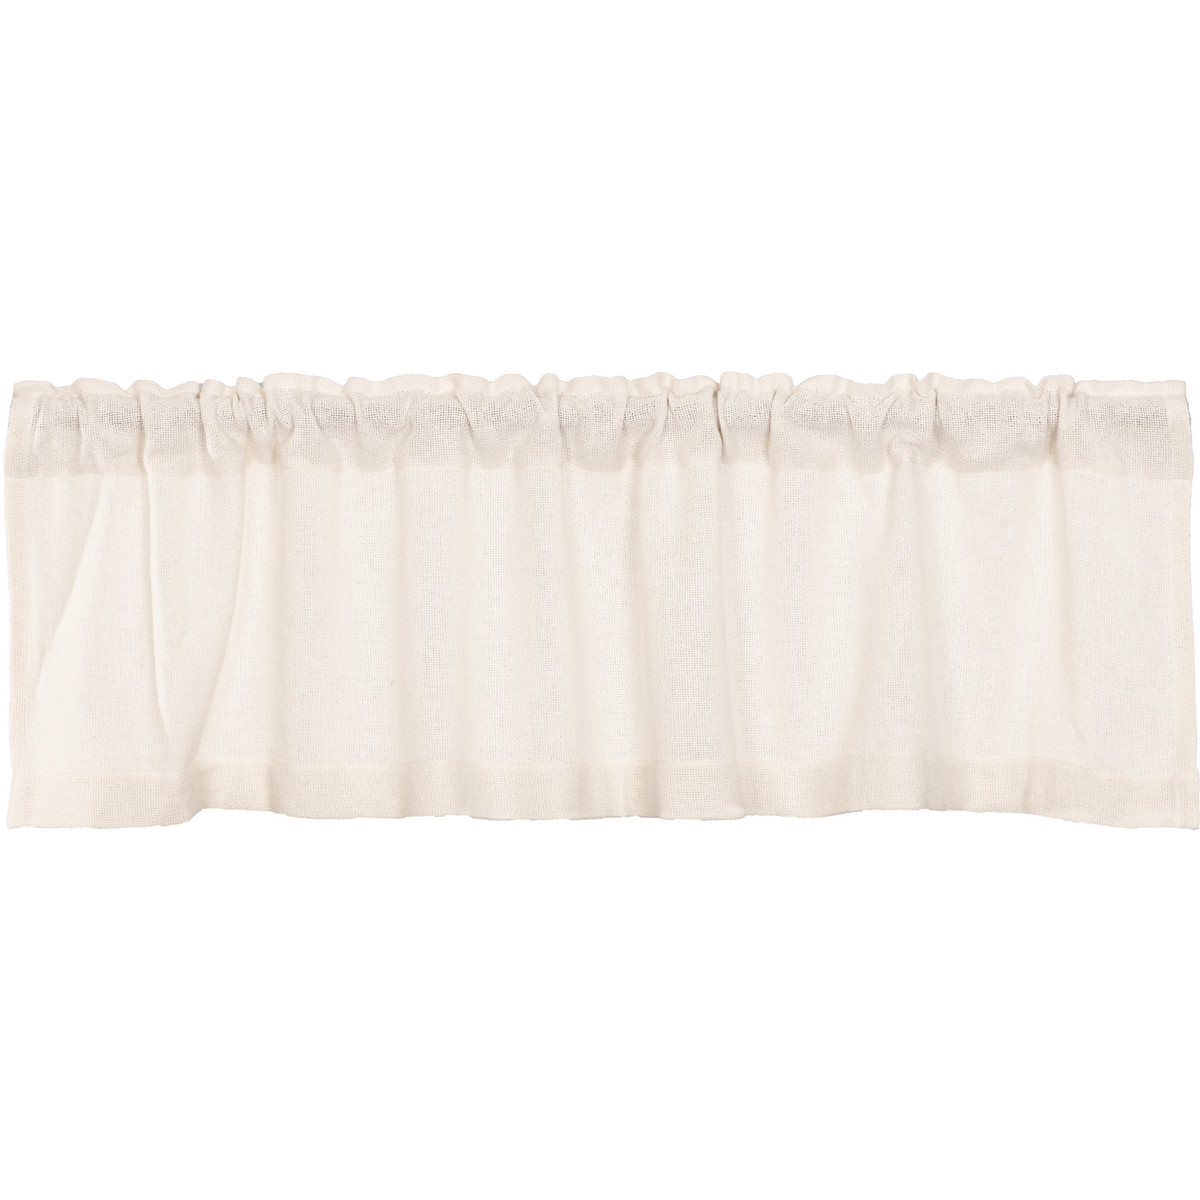 Burlap Antique White Valance - The Weed Patch